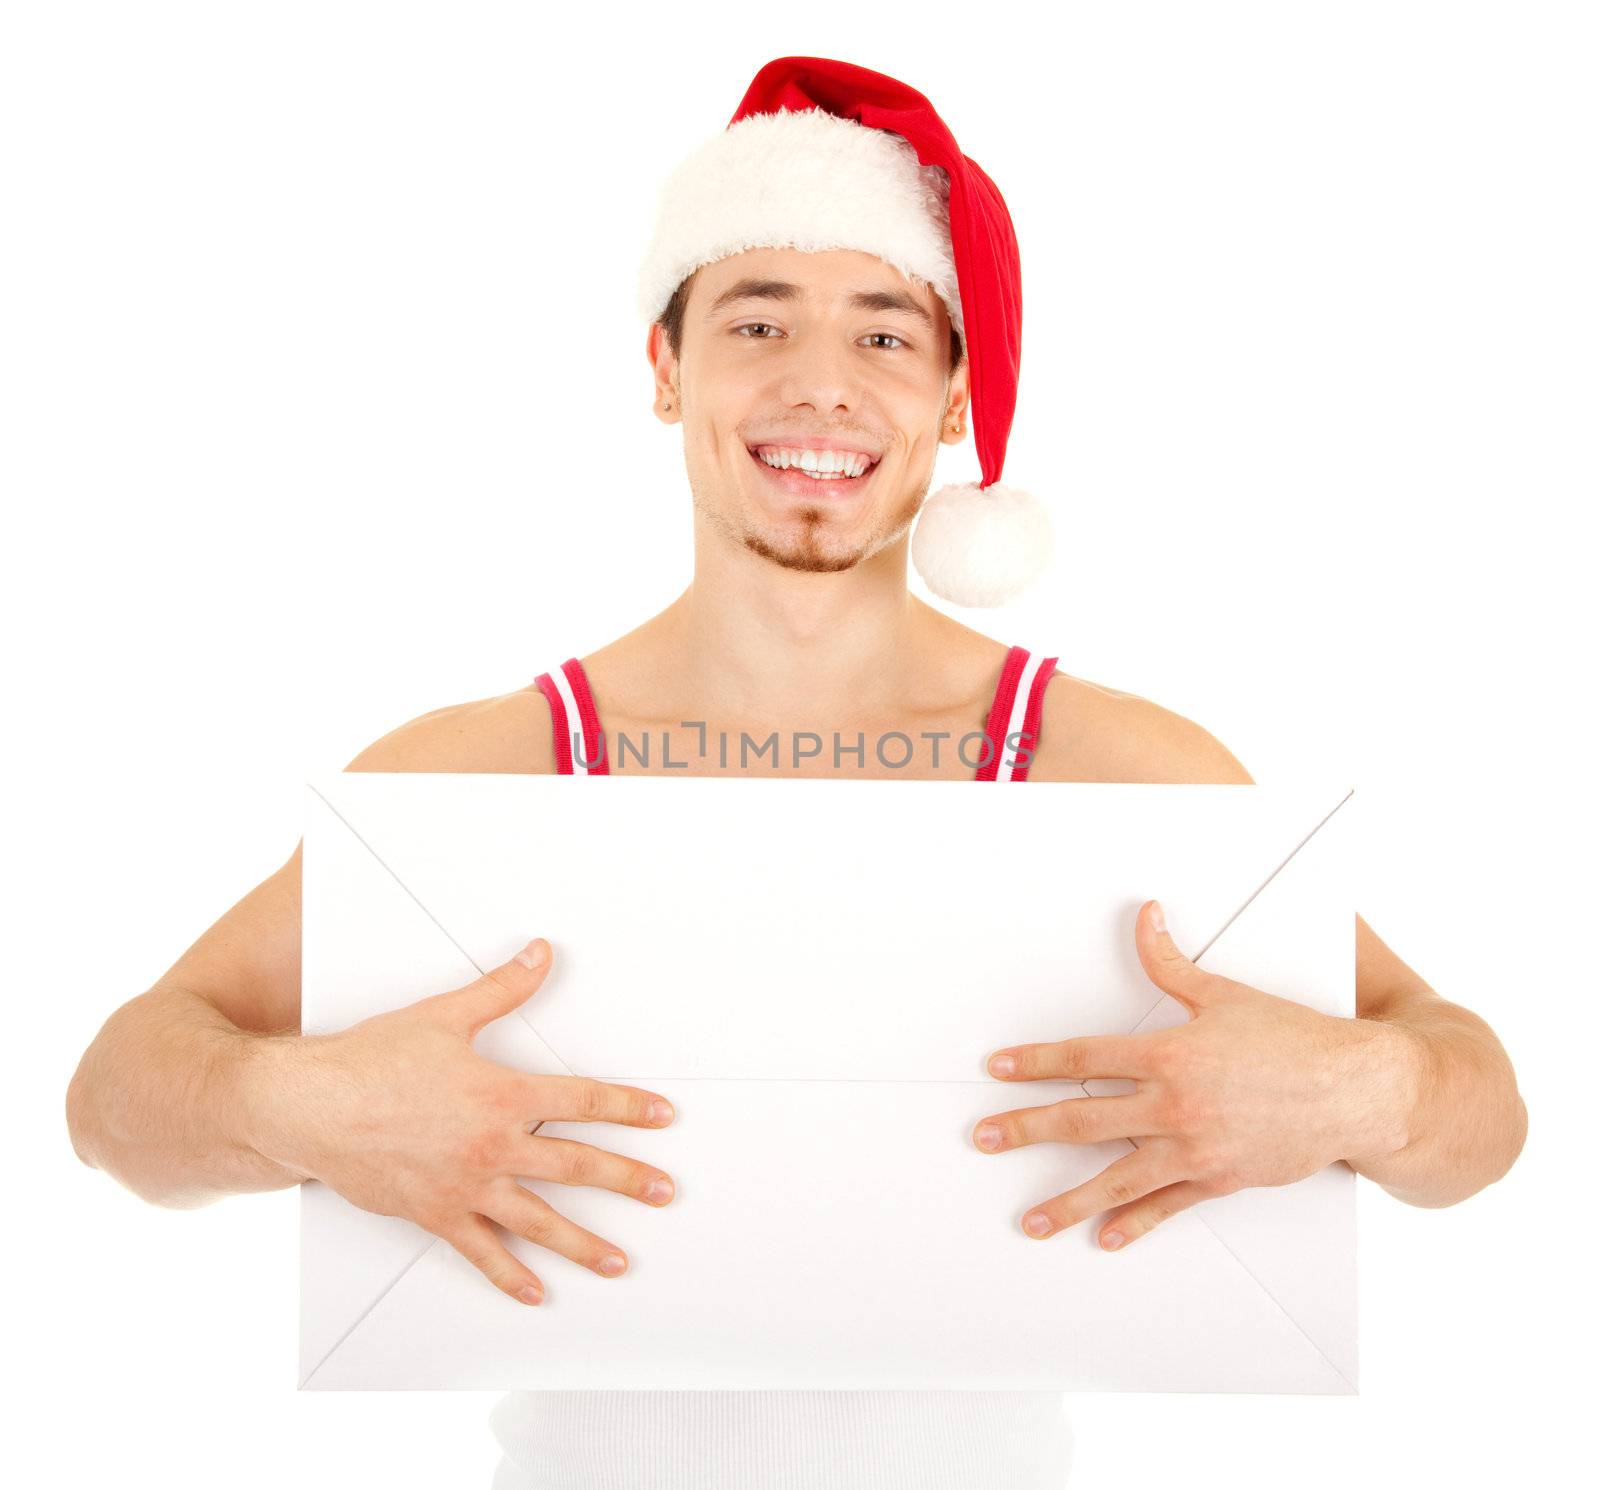 Young handsome smiling man in red Christmas hat with big white carton box. Isolated on white background. Focus on eyes.